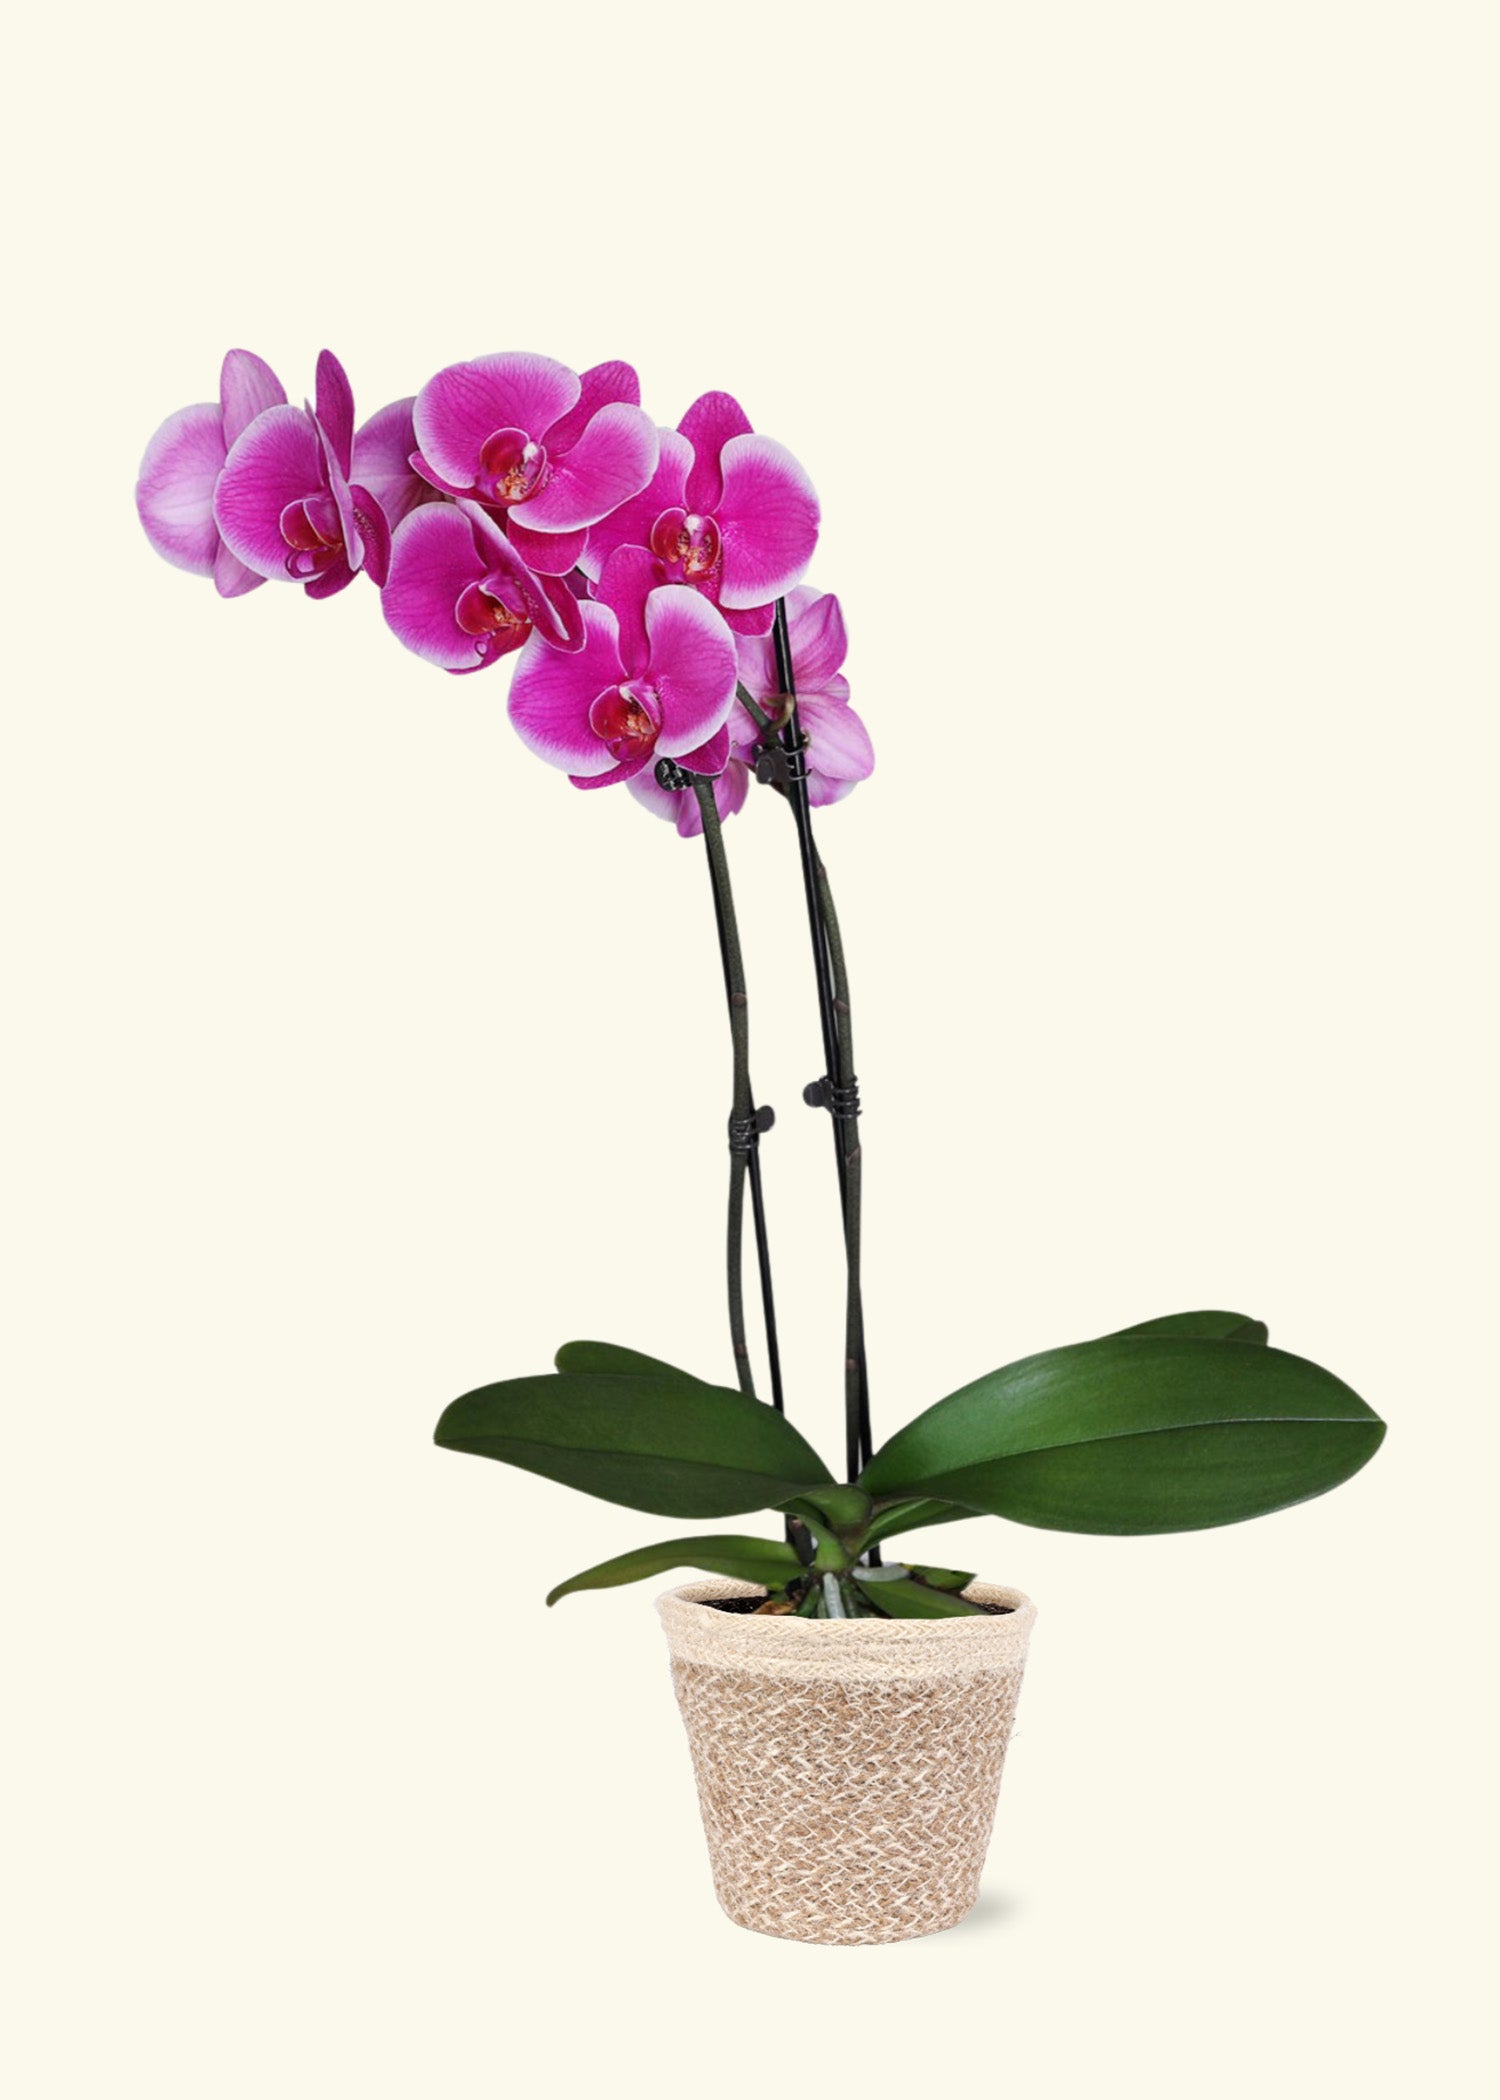 Small Purple Orchid in a cream ivo jute grow pot.